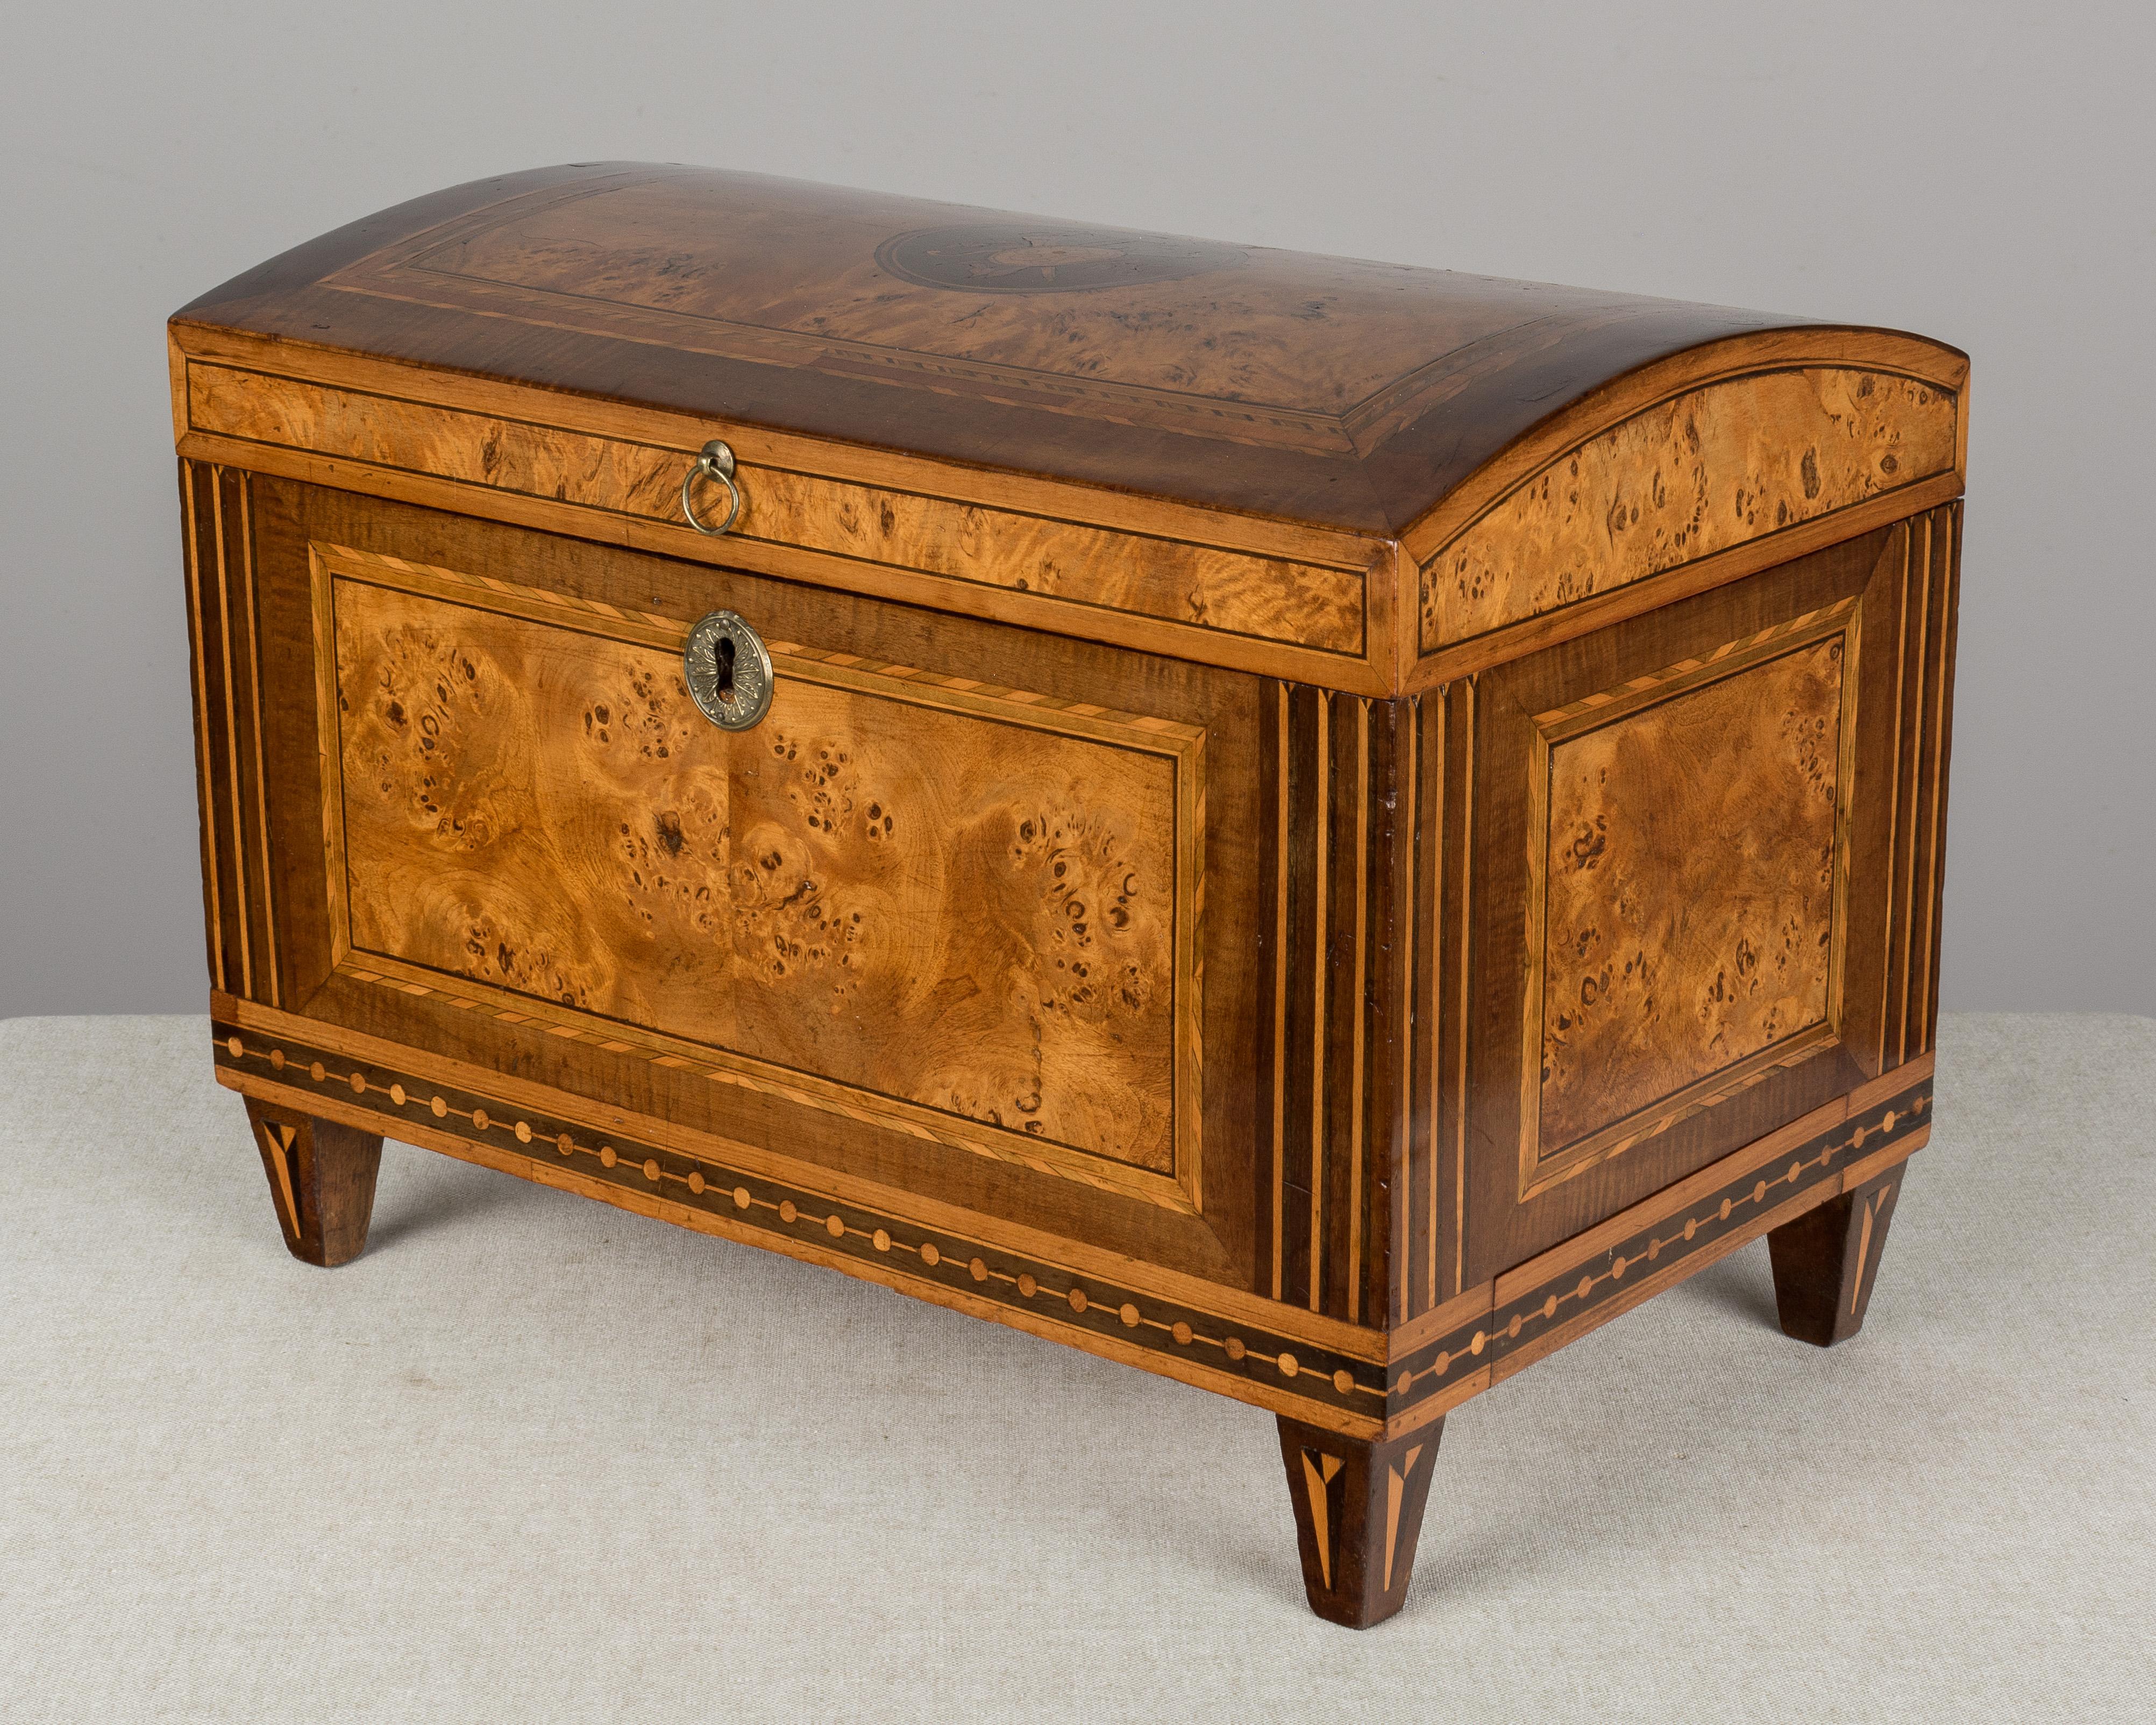 An early 19th century miniature Italian coffer, or hinged box, made of solid walnut with marquetry inlay of various woods and bookmatched bird's-eye maple veneer. The design on the top of the box indicates this was likely a wedding gift: the